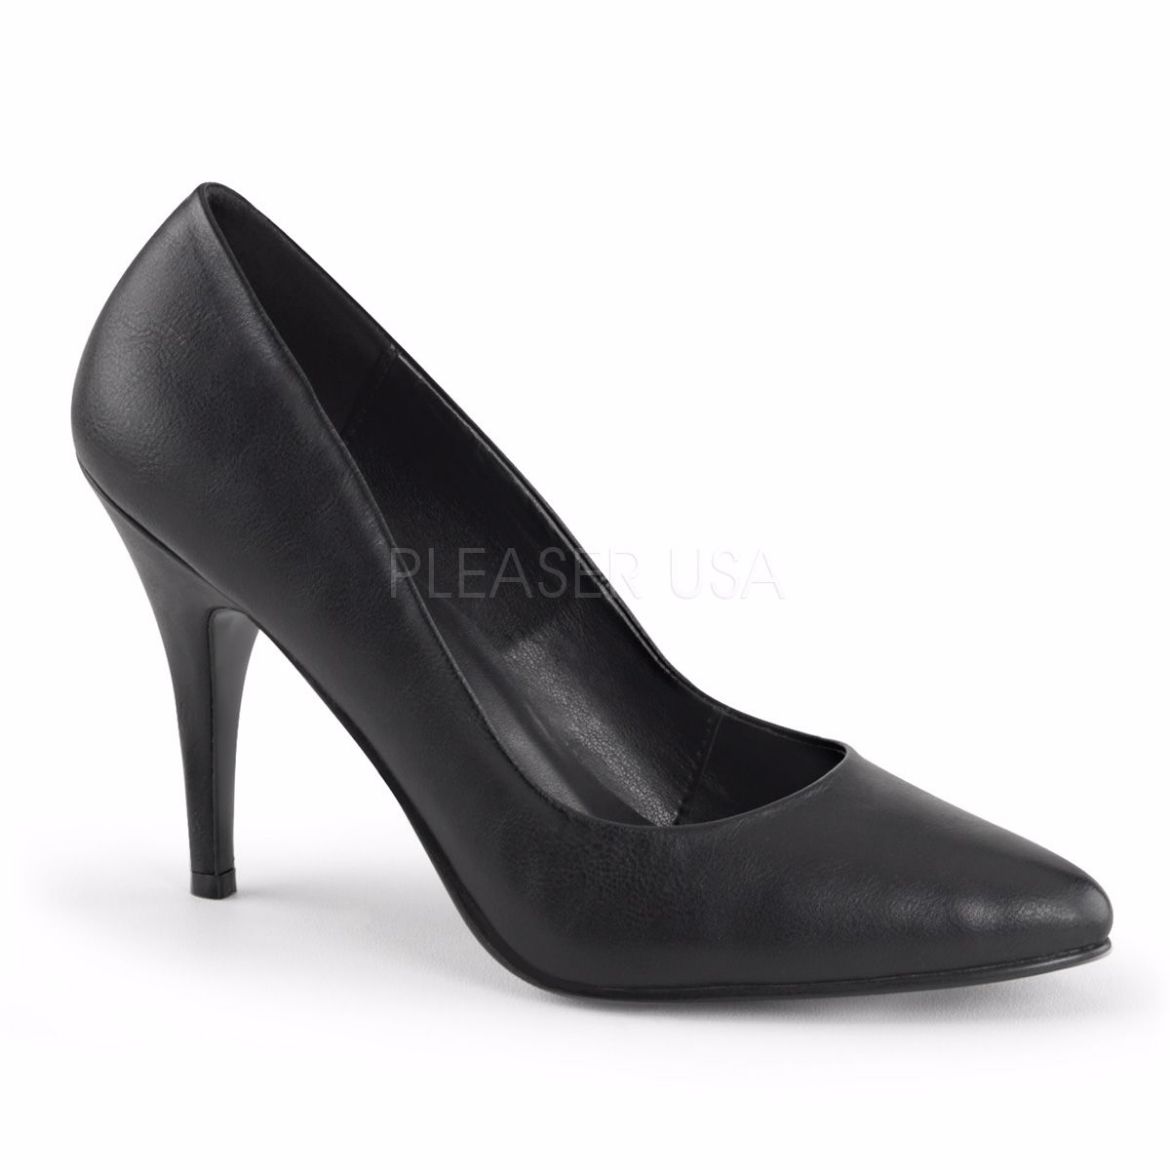 Product image of Pleaser Vanity-420 Black Faux Leather, 4 inch (10.2 cm) Heel Court Pump Shoes